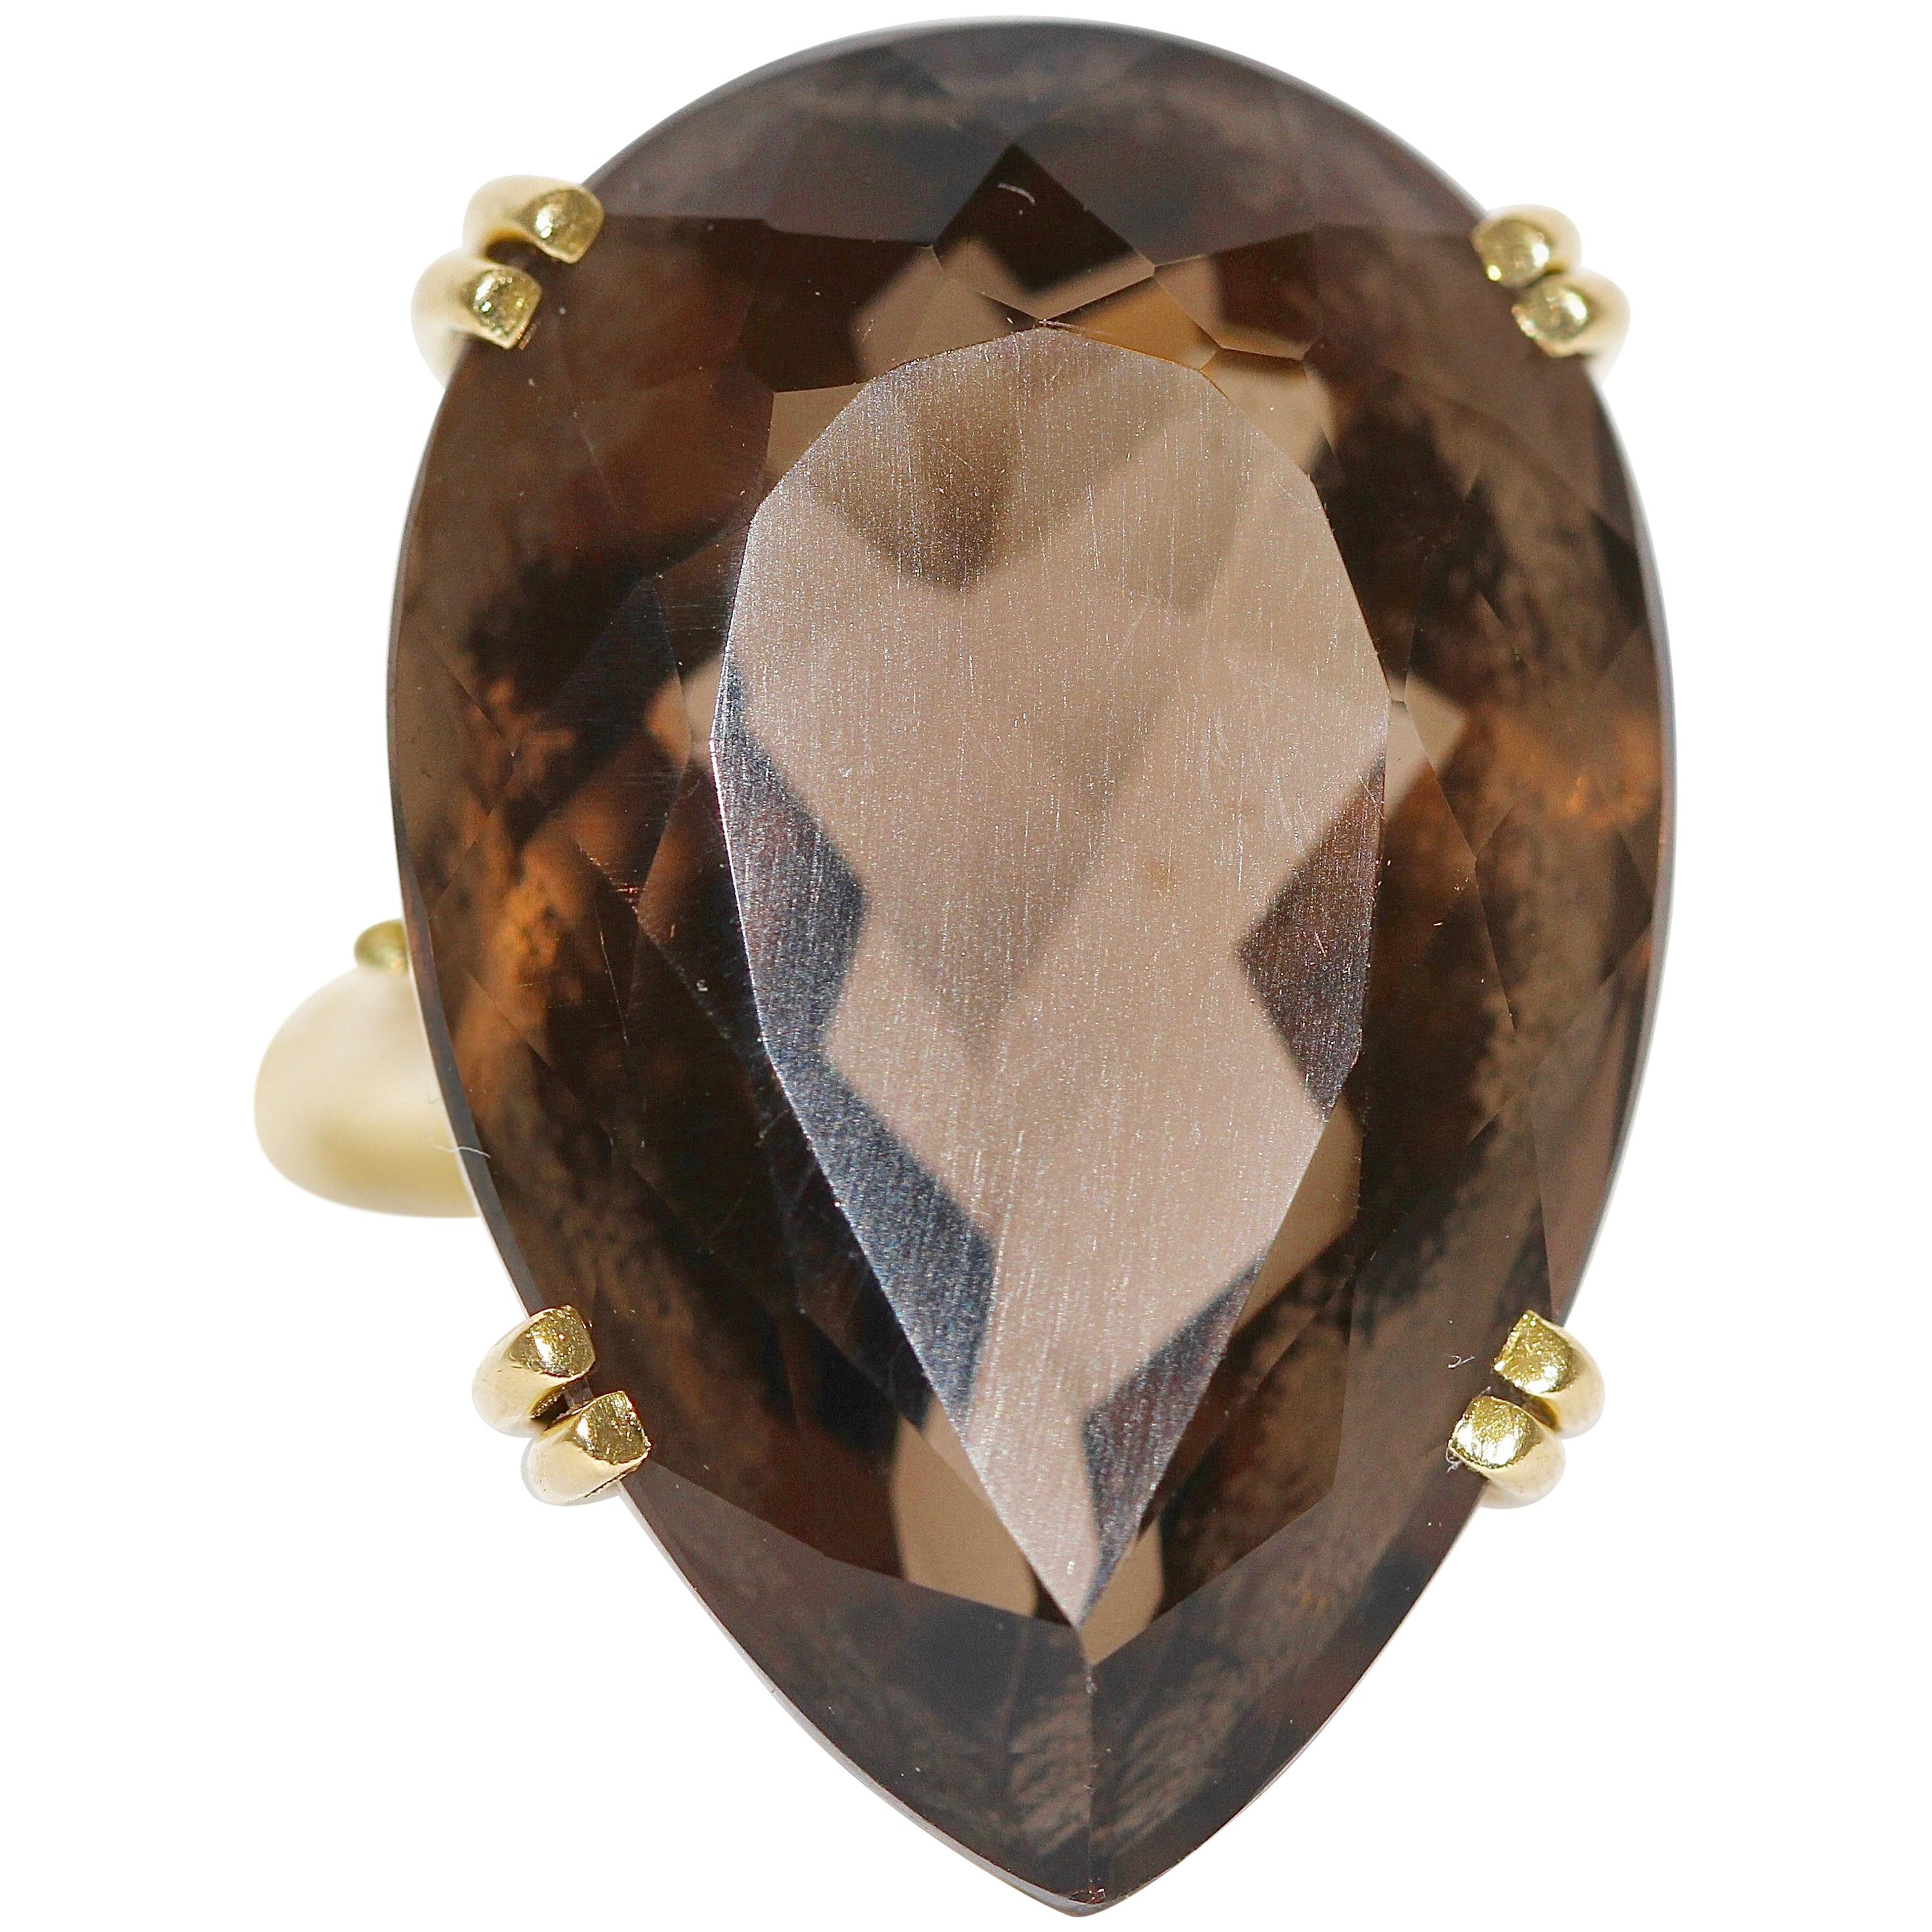 18 Karat Gold Ring with Large, Faceted Smoky Quartz, Topaz in Heart Shape